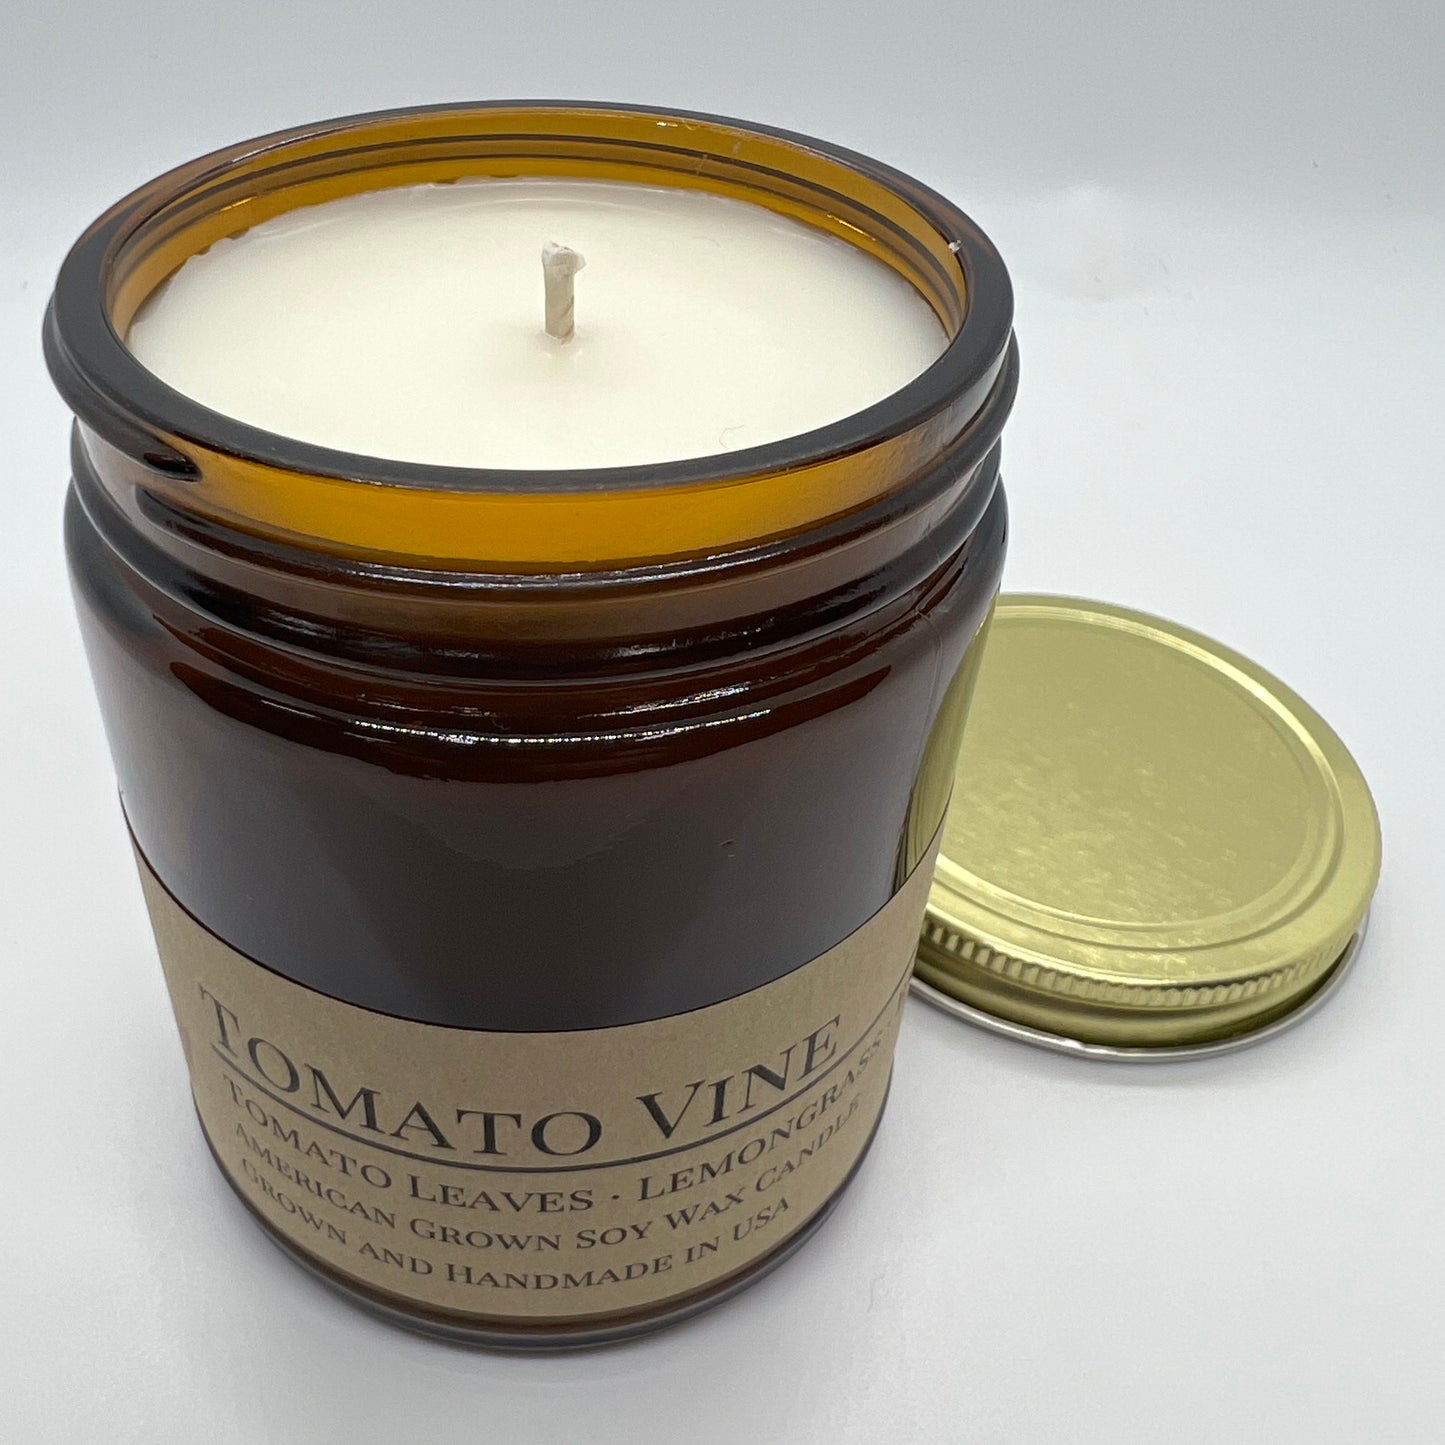 Tomato Vine Soy Candle | 9 oz Amber Apothecary Jar